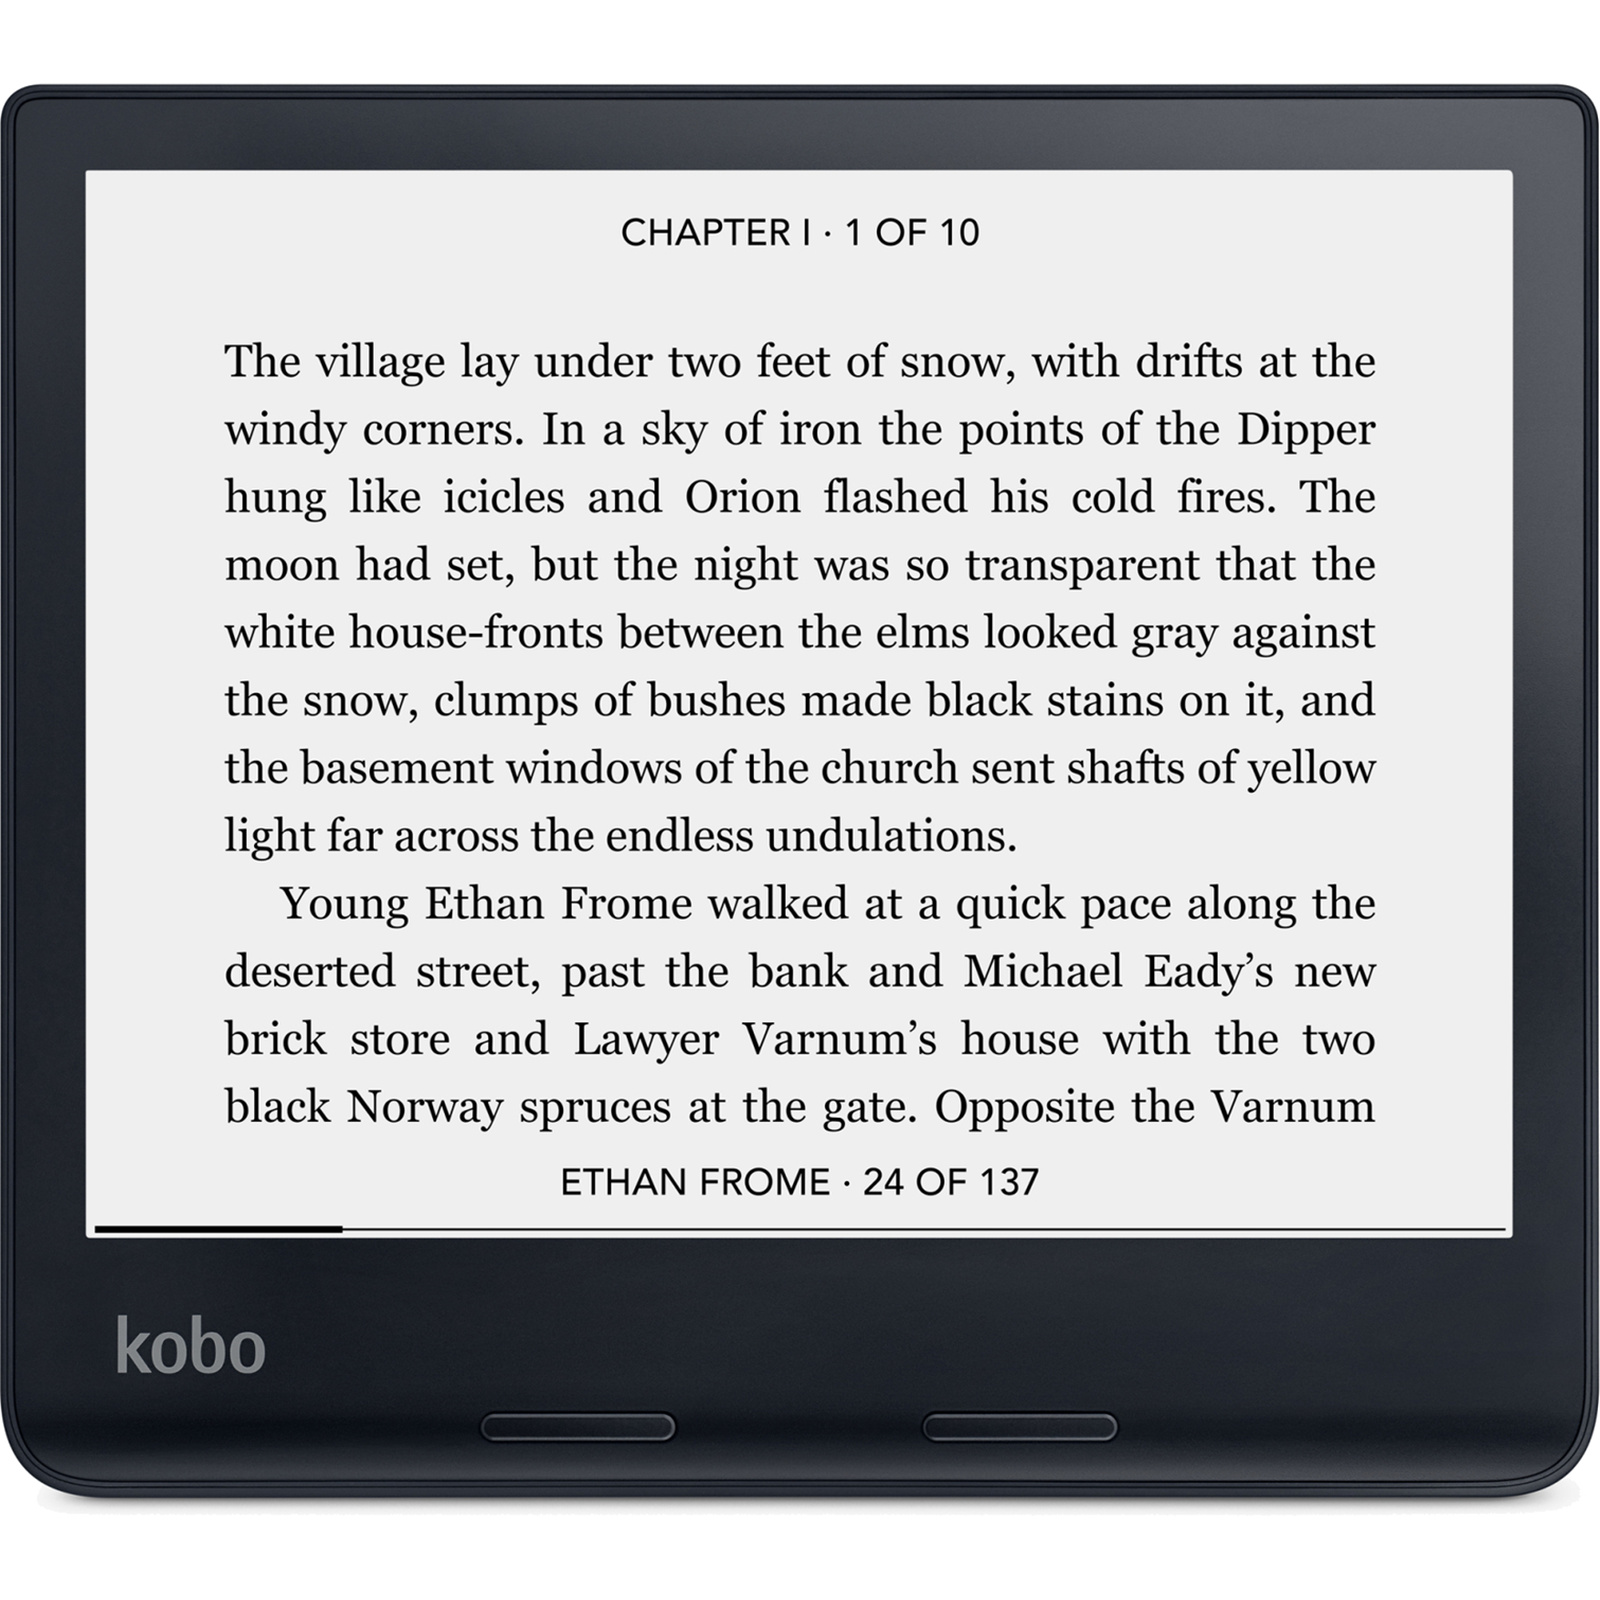  Kobo Libra 2, eReader, 7” Glare Free Touchscreen, Waterproof, Adjustable Brightness and Color Temperature, Blue Light Reduction, eBooks, WiFi, 32GB of Storage, Carta E Ink Technology